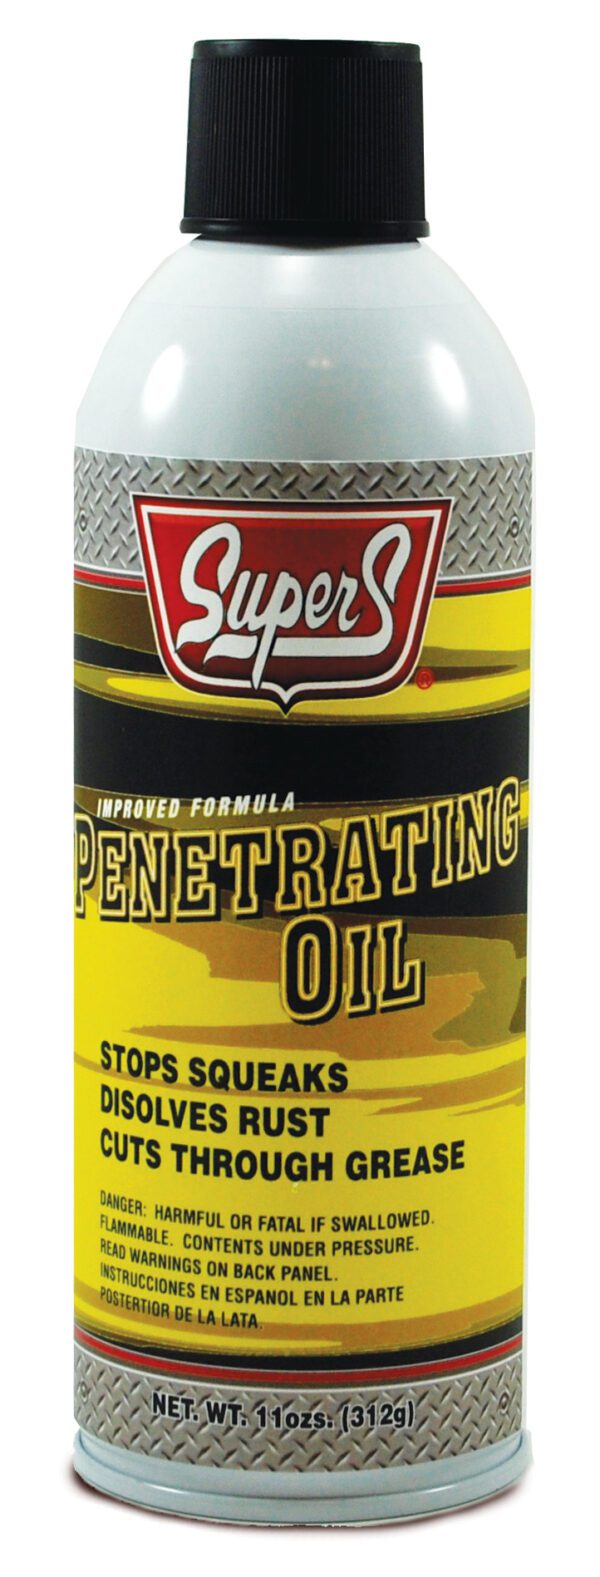 SuperS Penetrating or Lubricating Oil